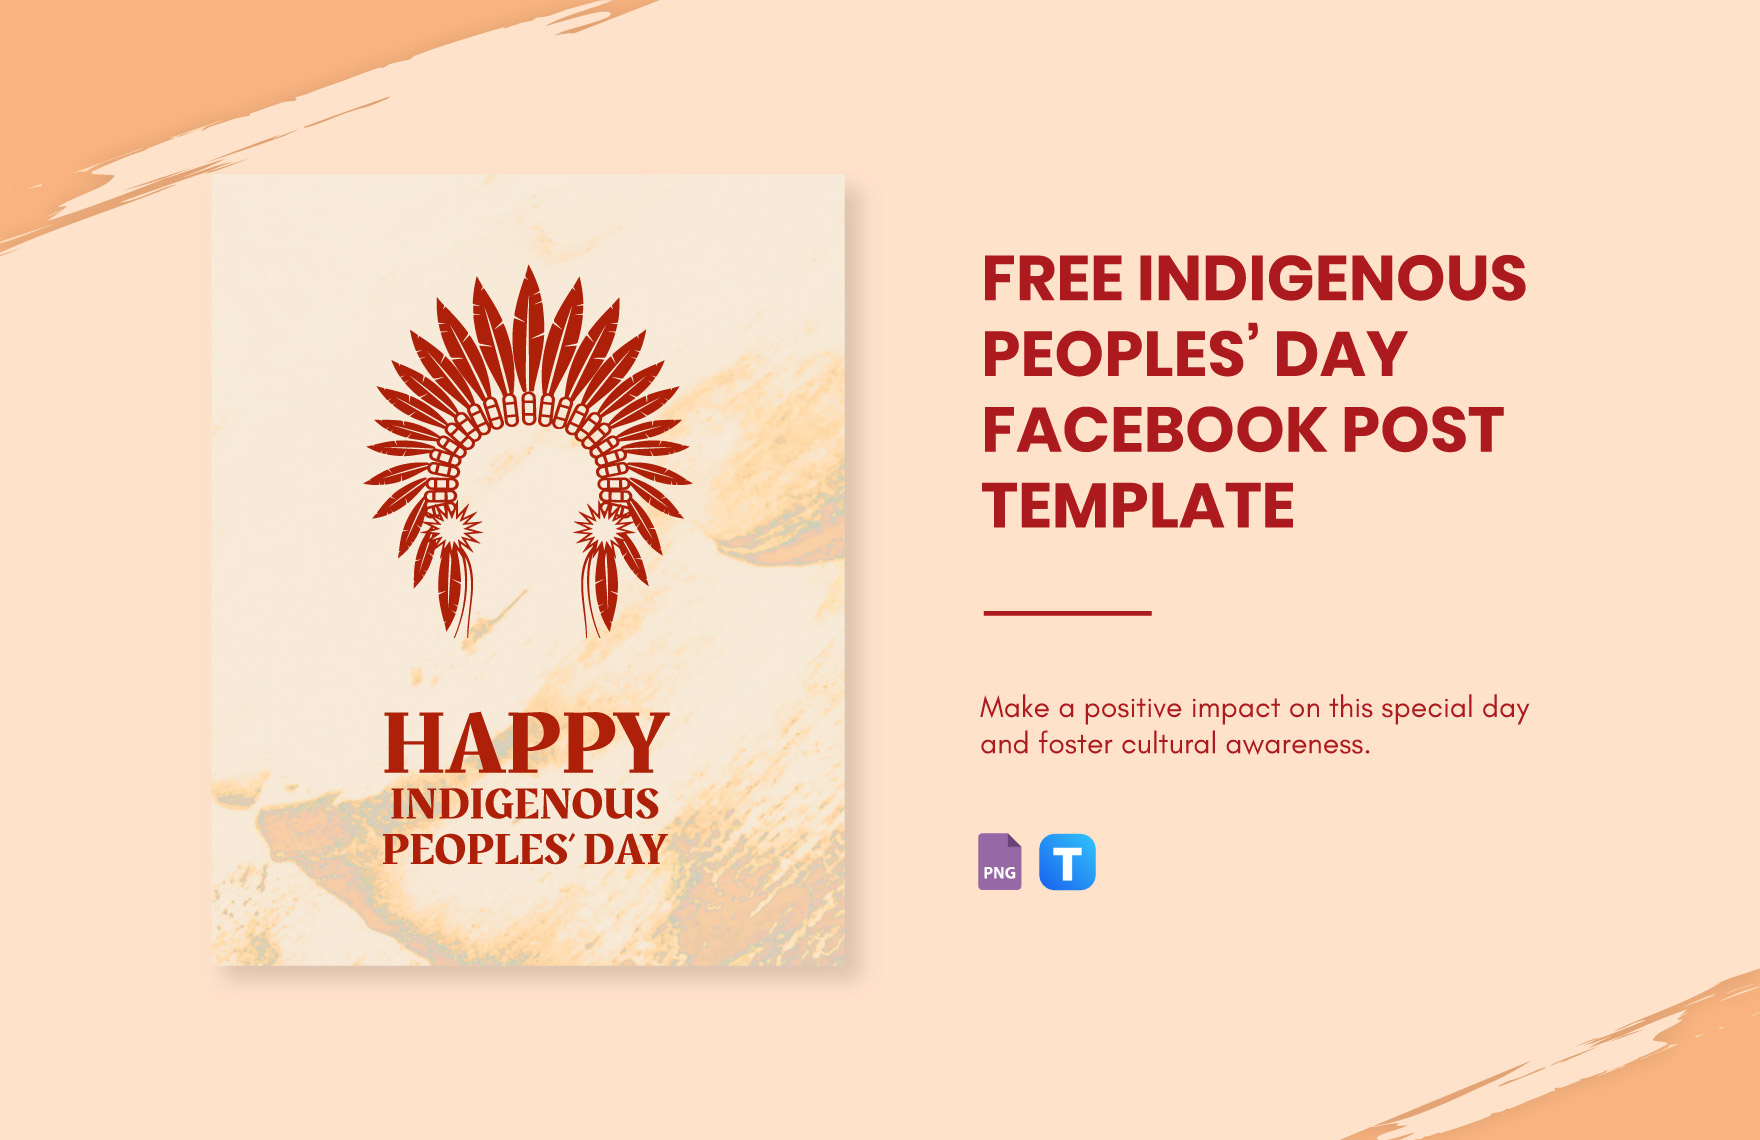 Free Indigenous Peoples' Day Facebook Post Template